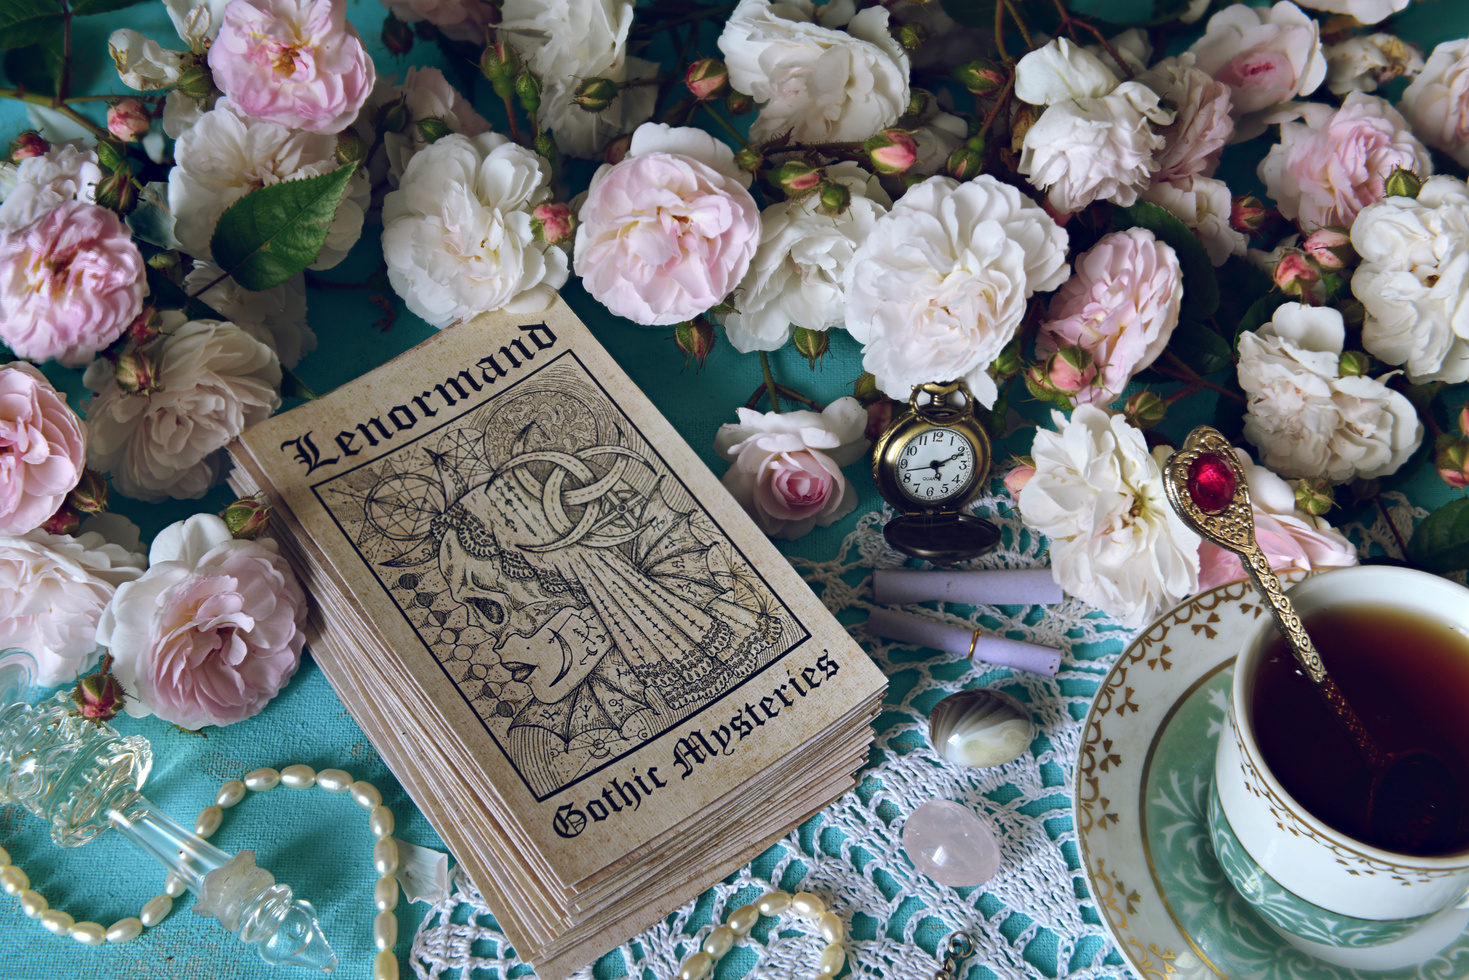 Still life with Lenormand oracle cards, cup and roses.